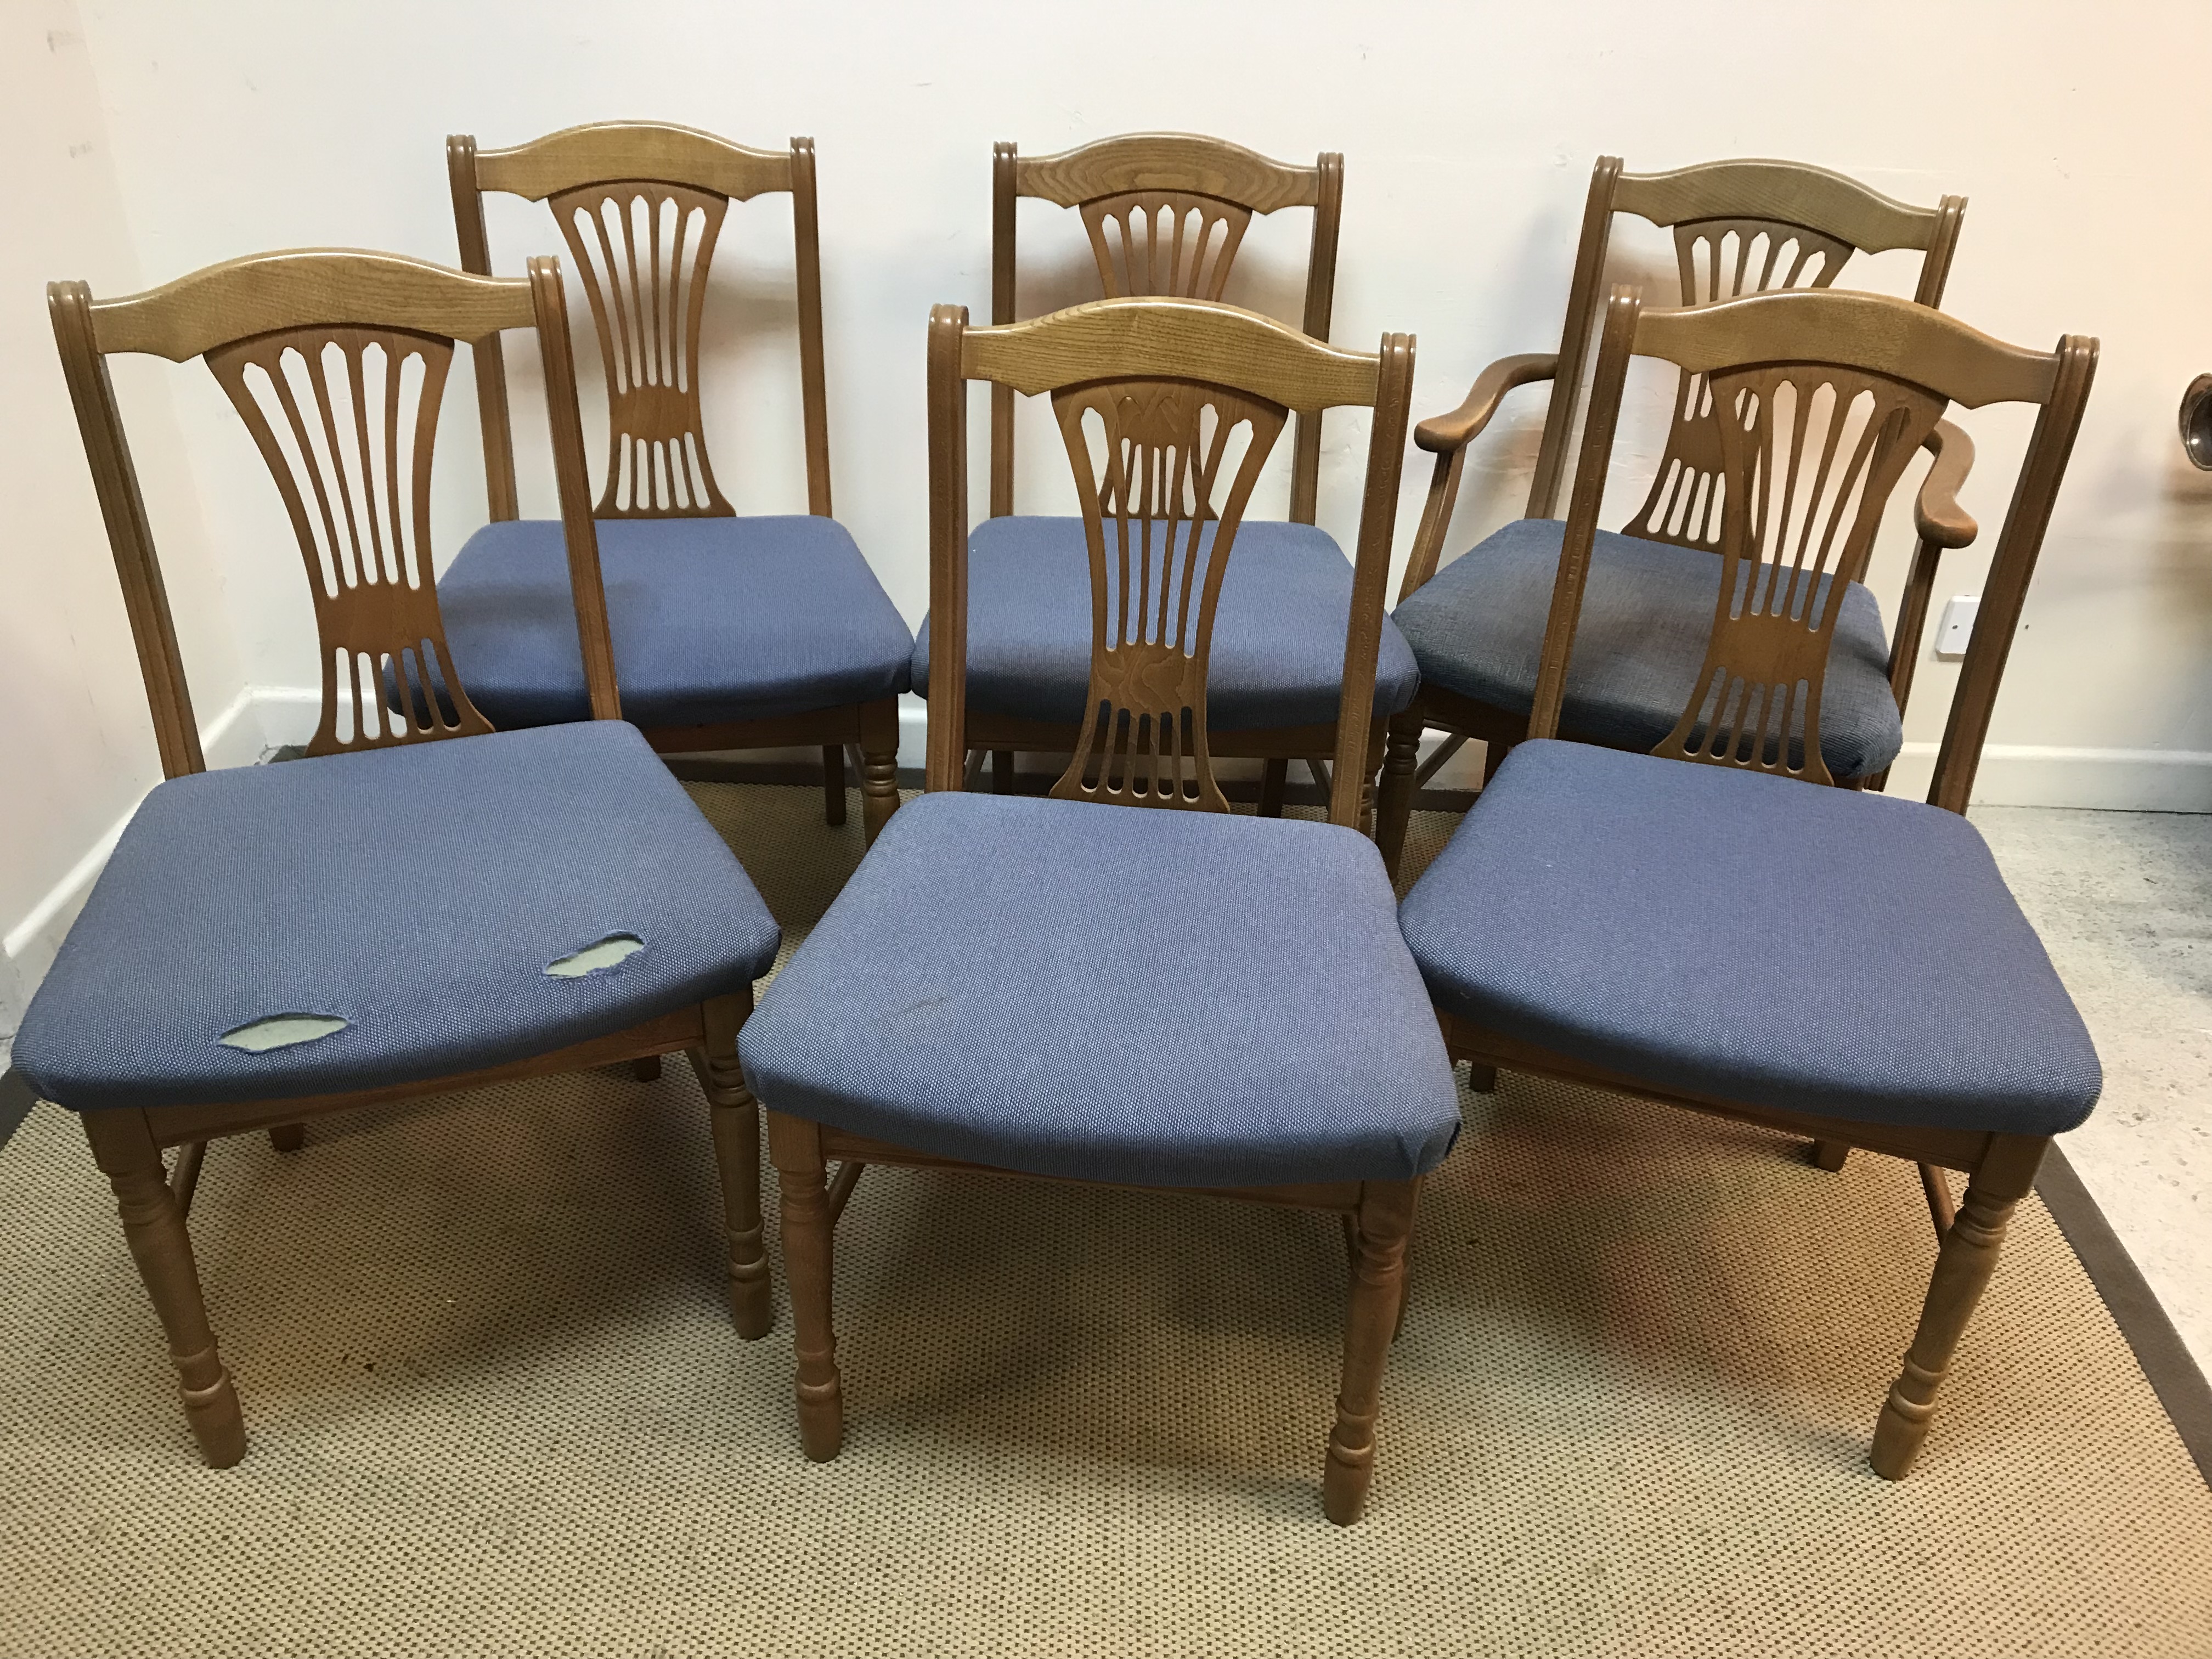 A modern set of six oak framed dining chairs with upholstered seats (5 plus 1)